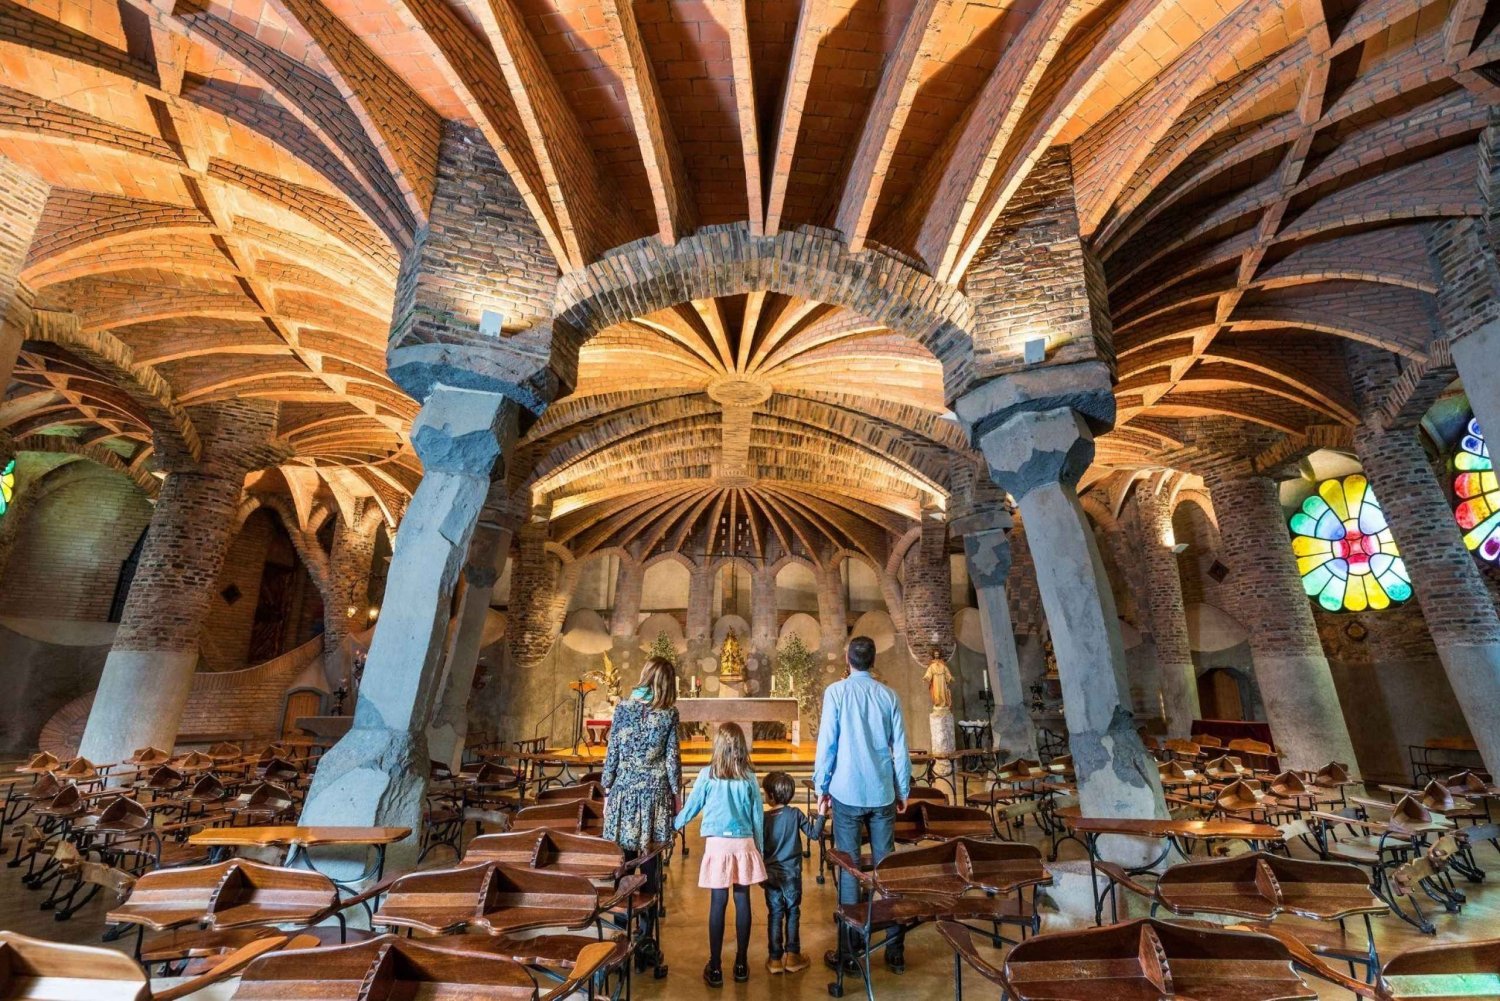 Highlights Guided visit to the Crypt and the Colonia Güell